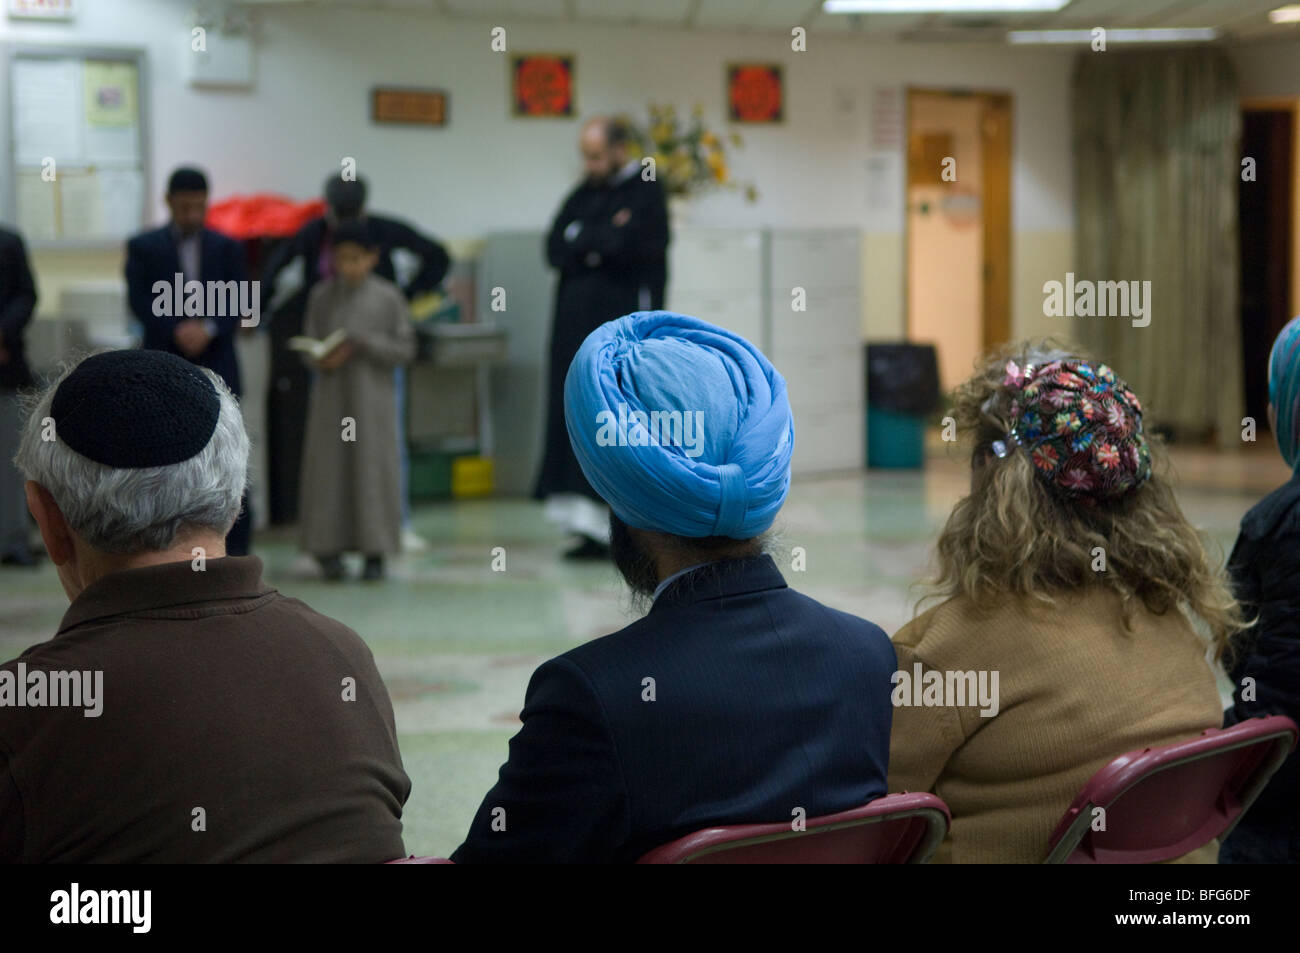 Muslim Center of New York during the Queens Interfaith Unity Walk in Flushing, Queens Stock Photo